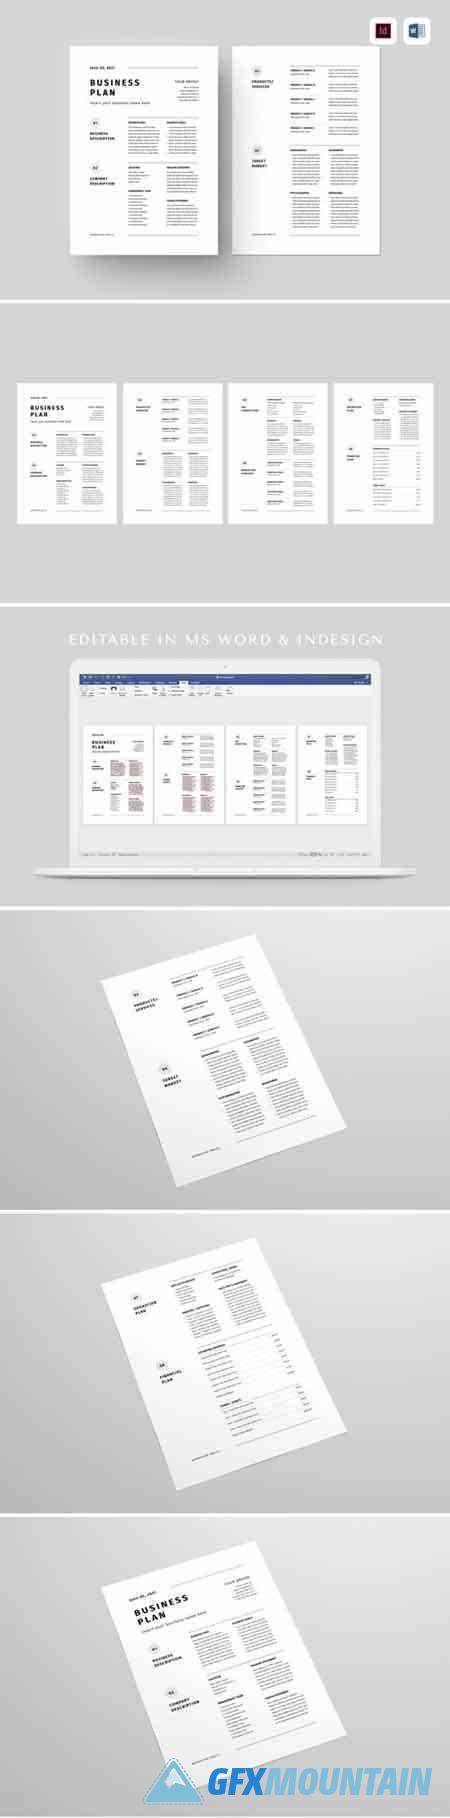 Business Plan - MS Word & Indesign